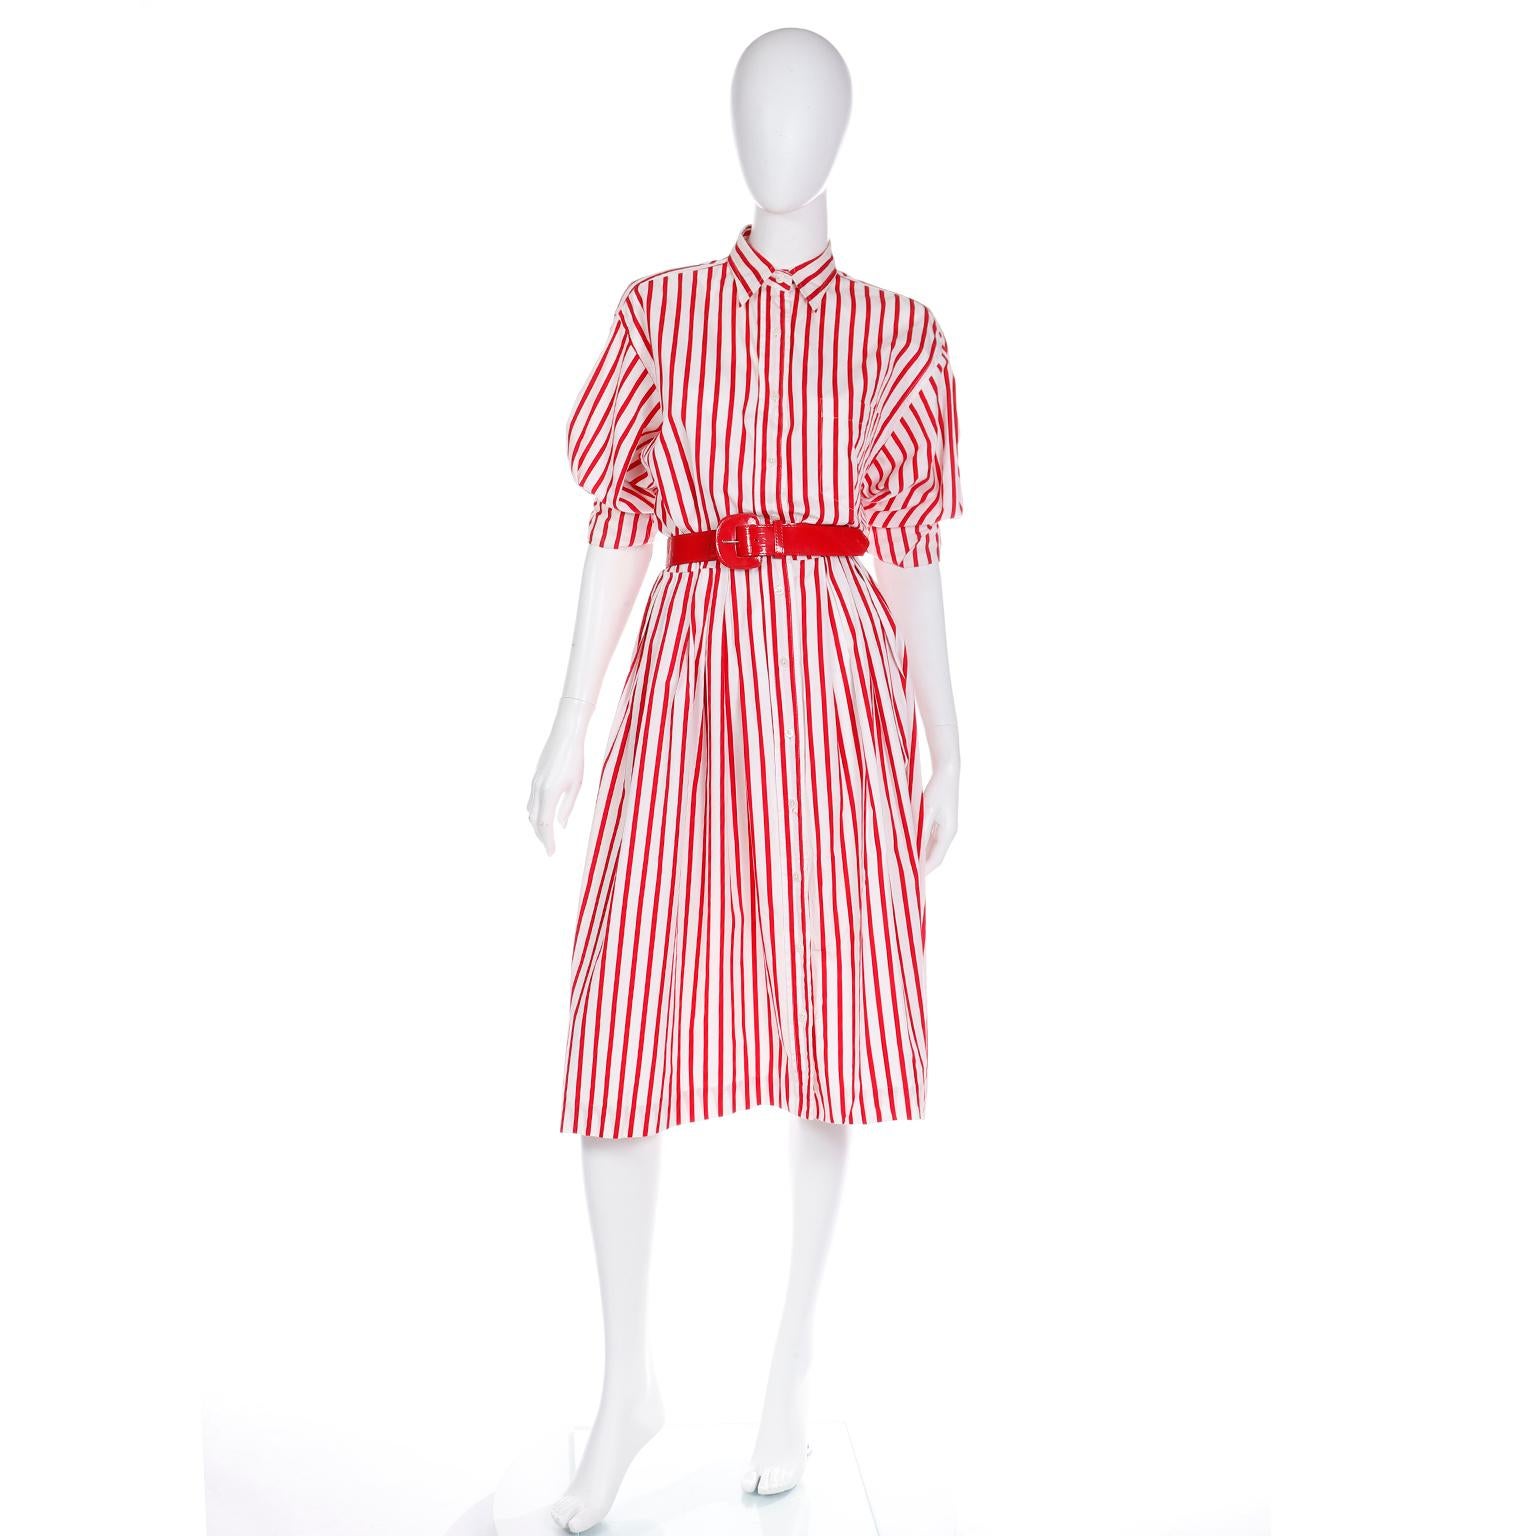 We love vintage Ralph Lauren and this cotton red and white striped shirt dress would make a perfect wardrobe addition this summer! The dress has a pointed collar and long cuffed sleeves with buttons up the front for closure. Shirt dresses are so